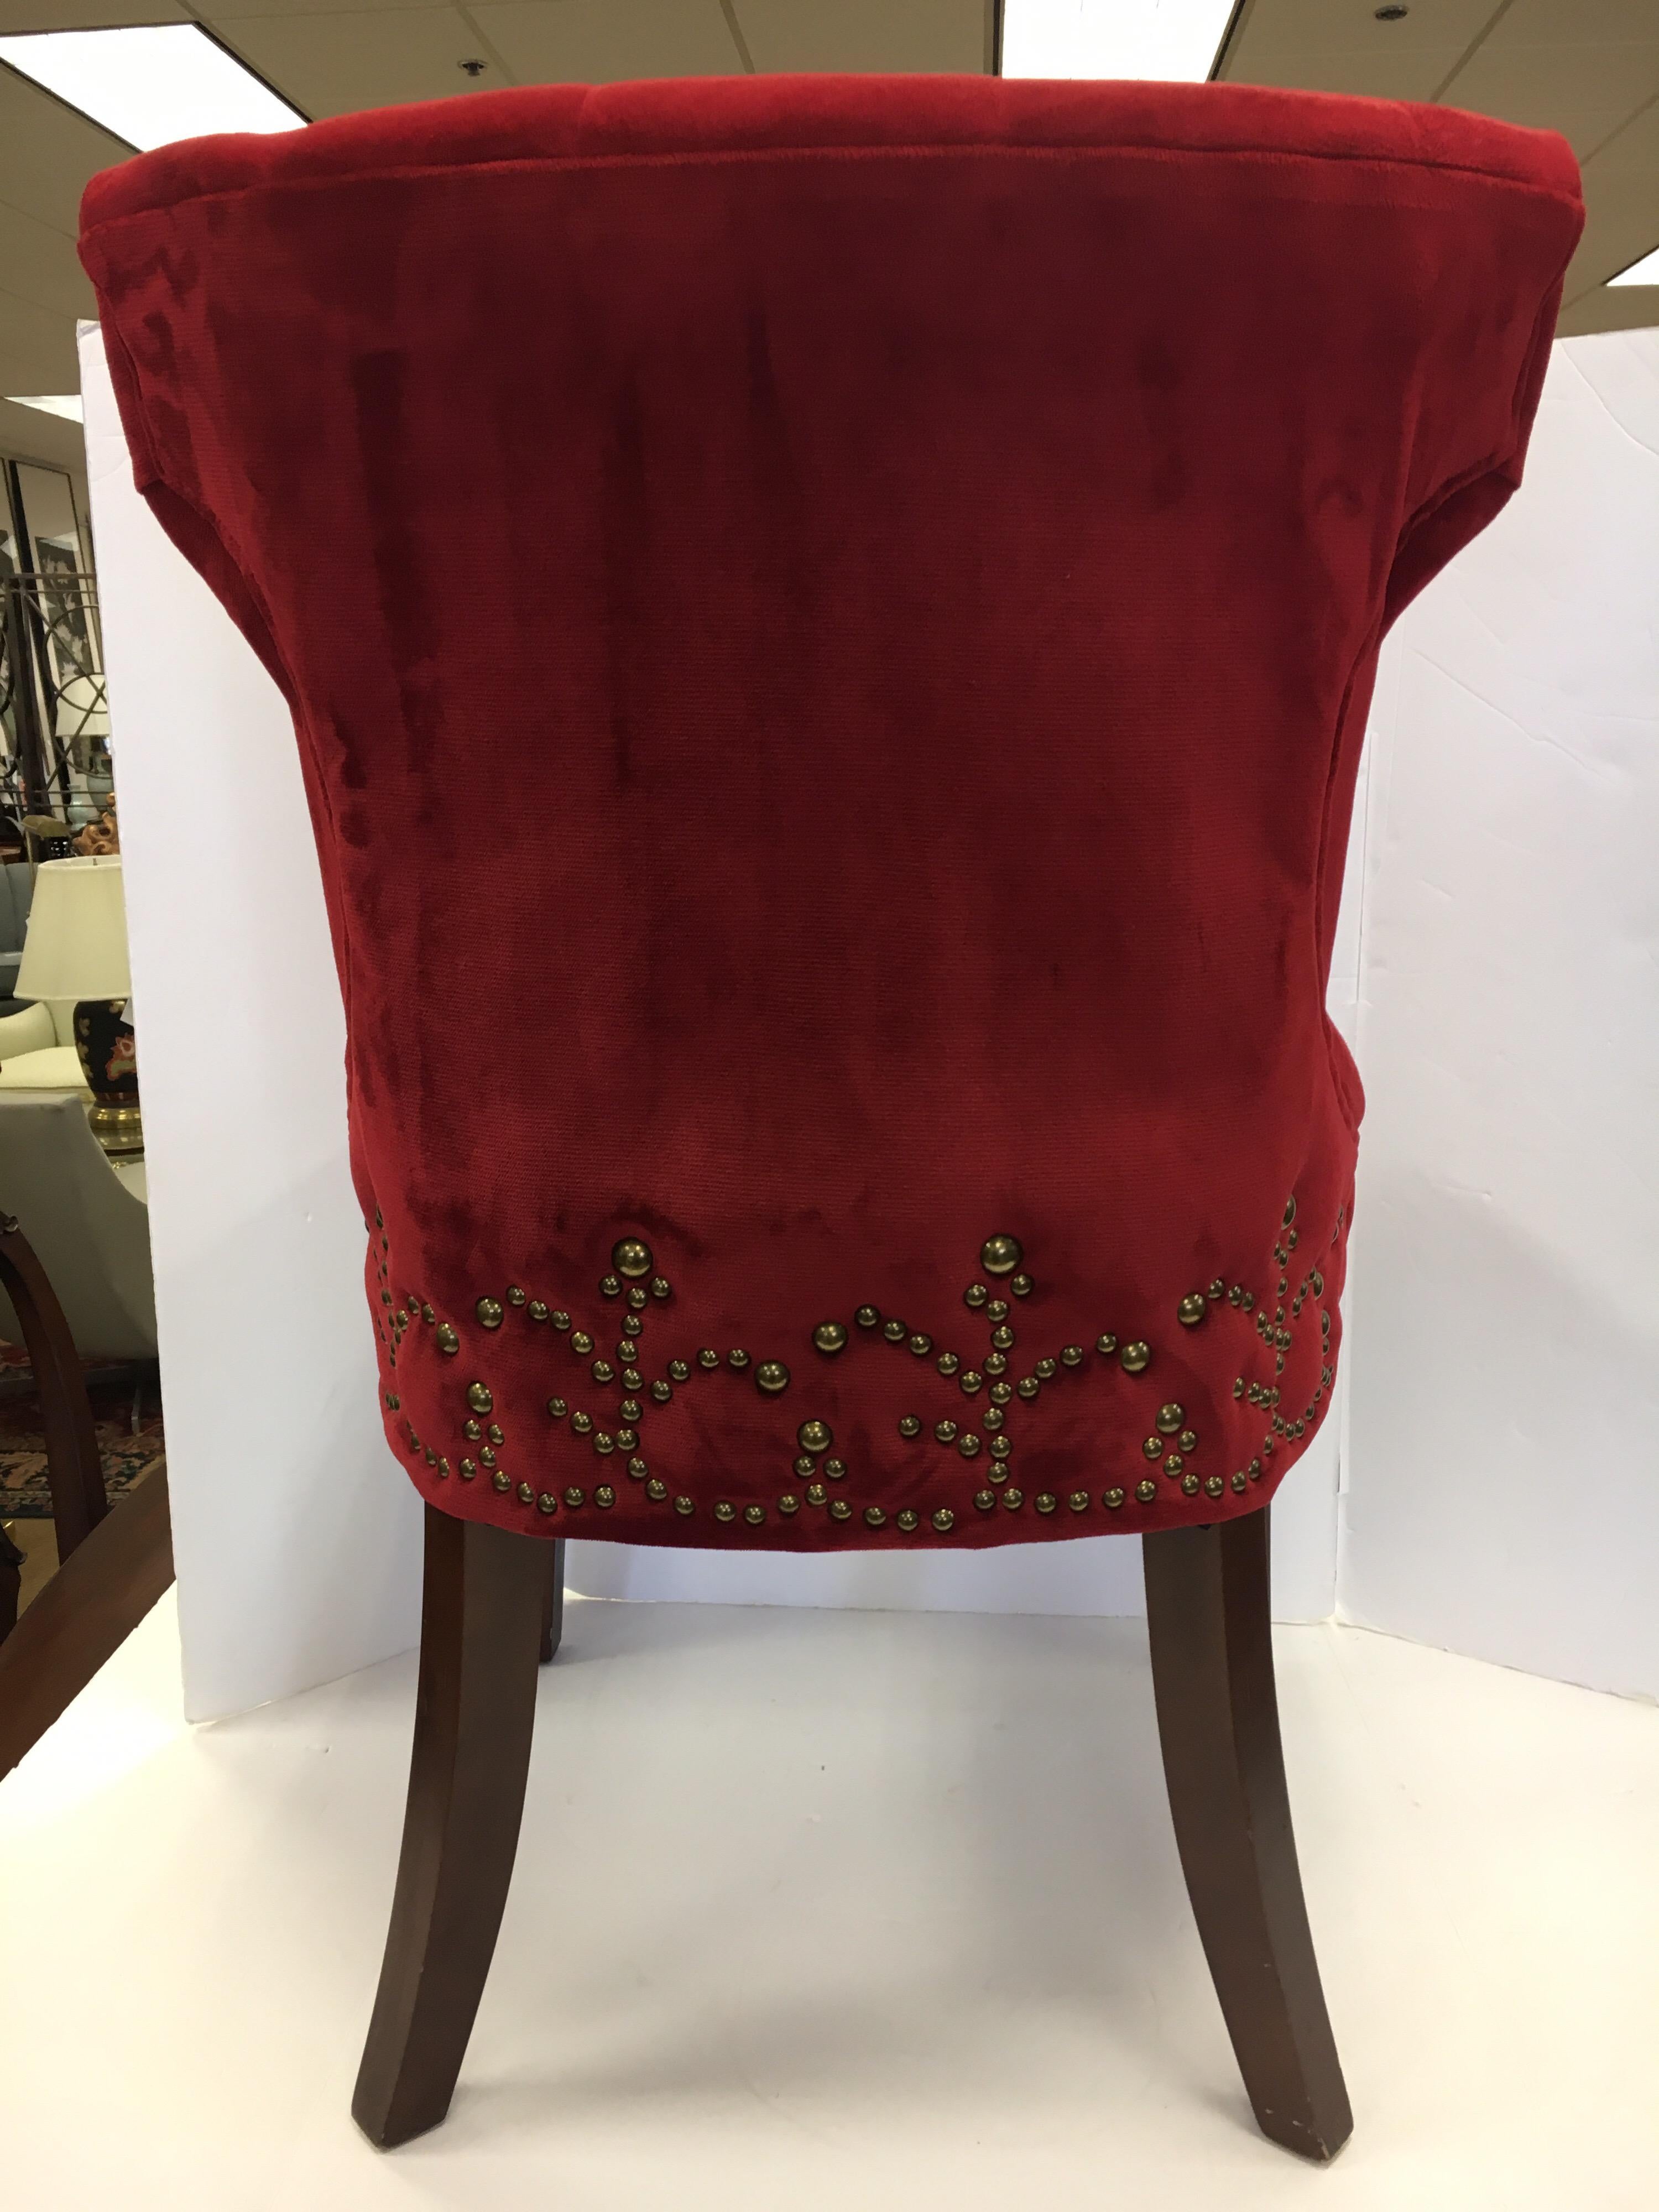 Stunning red cotton fabric upholstery on tufted dining chair with one of a kind nailhead pattern throughout
which looks like a work of art.